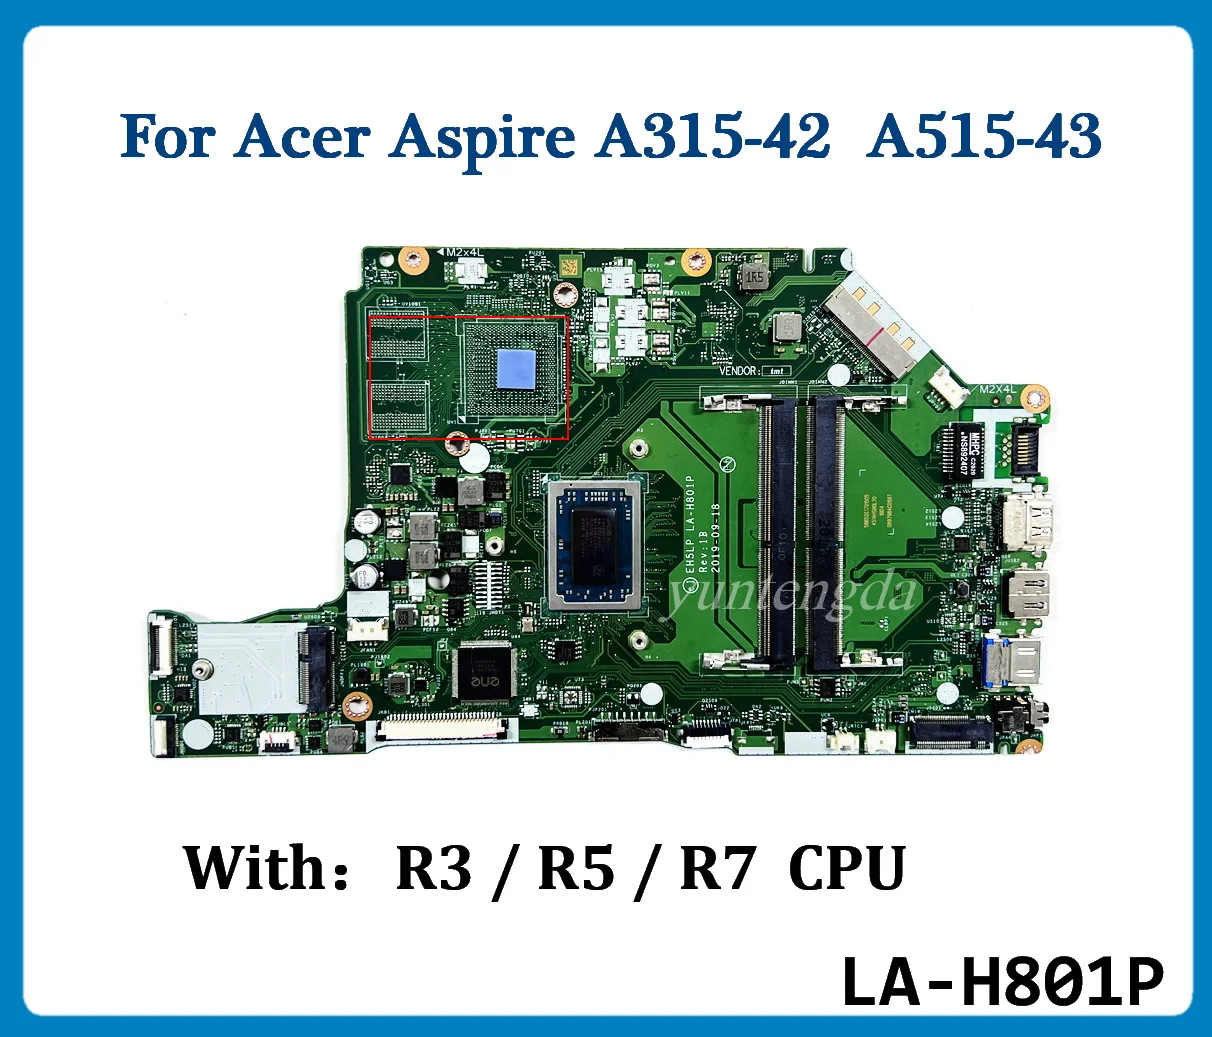 

LA-H801P For Acer Aspire A315-42 A315-42G A515-43 A515-43G Laptop Motherboard With R3 R5 R7 CPU 100% Tested